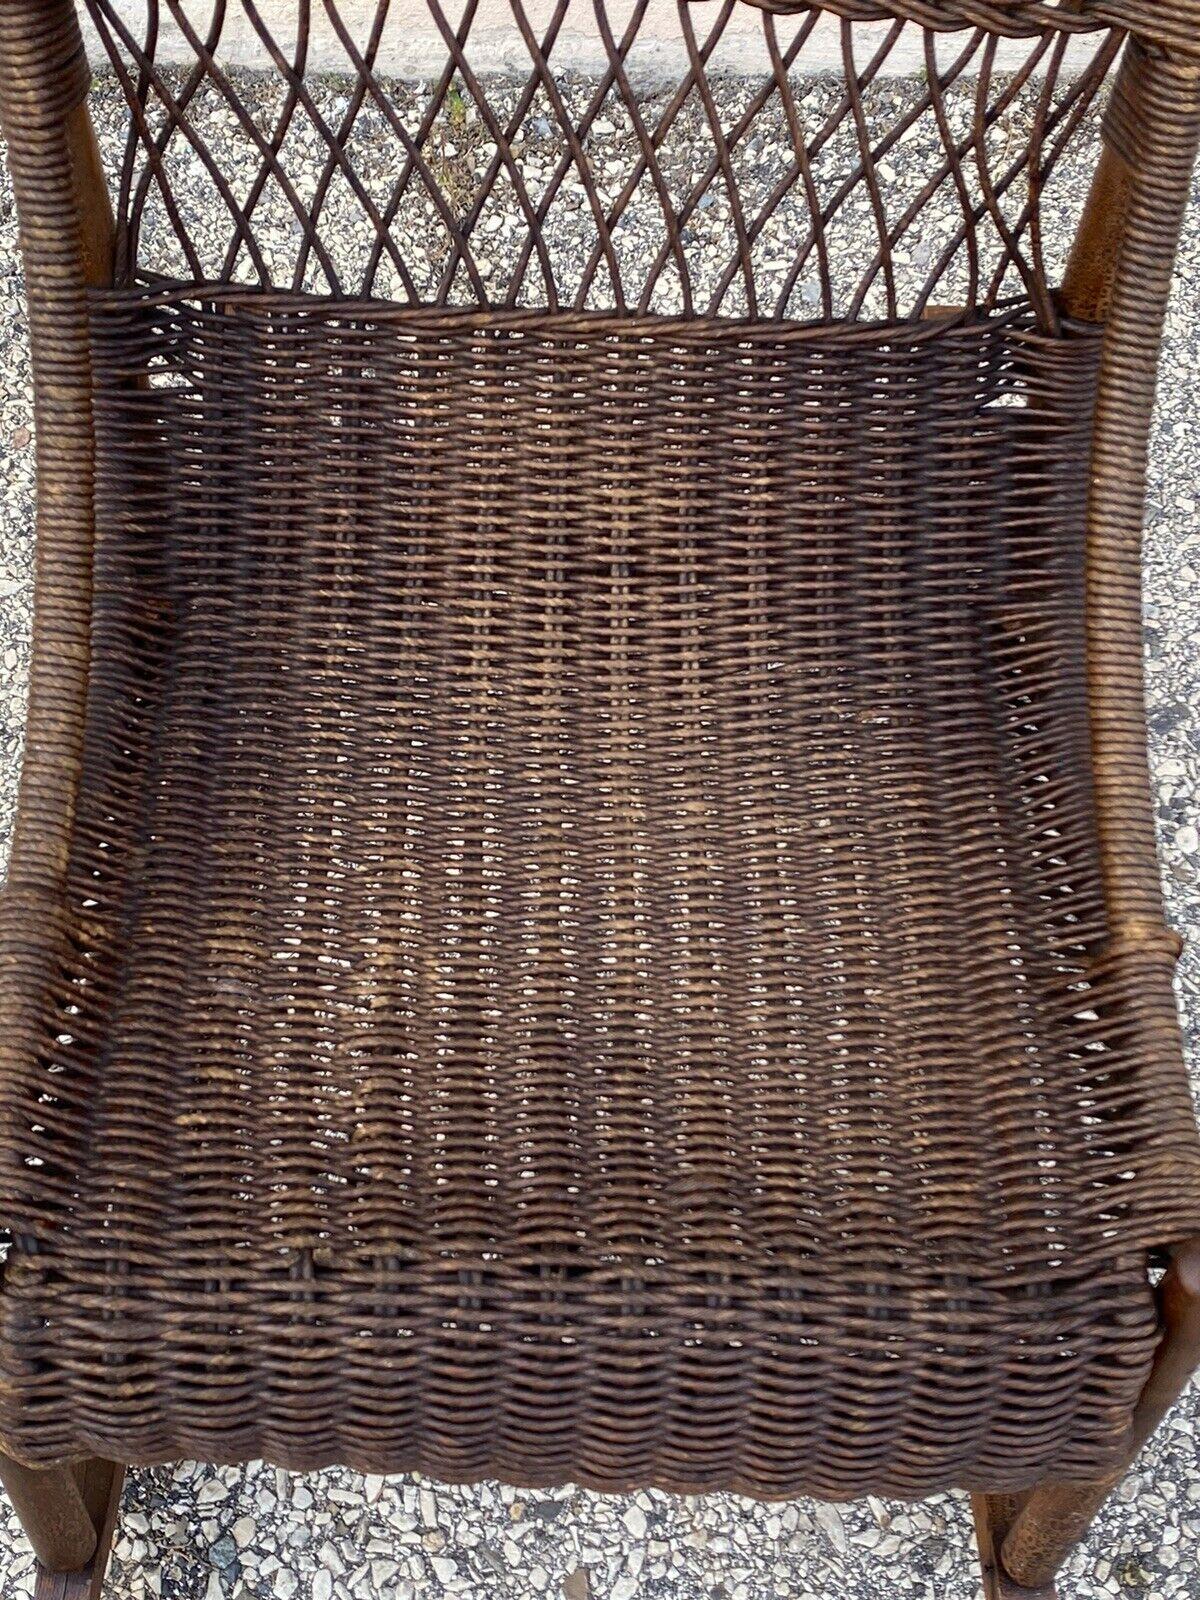 Antique Wicker and Rattan Wooden Victorian Rocking Chair Rocker In Good Condition For Sale In Philadelphia, PA